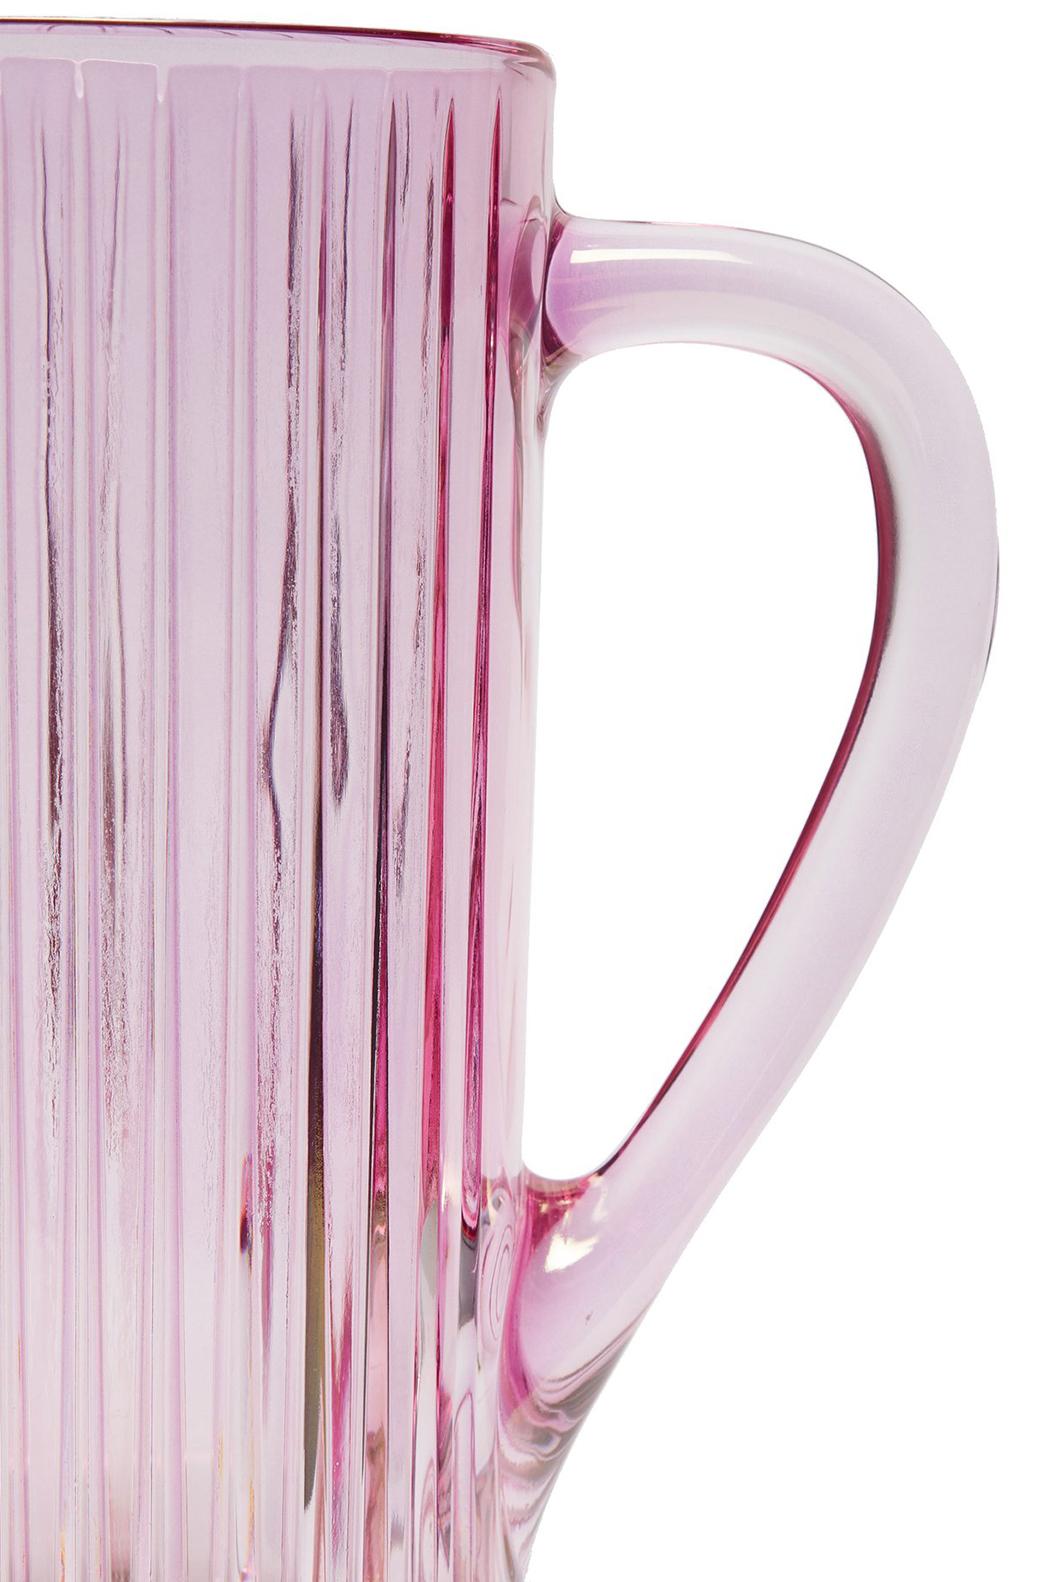 This glass pitcher is hand-colored in a vibrant shade of pink. The outer glass is vertically grooved with an iridescent finish.

Composition: glass
Colour: Rose Pink
Handwash only
Made n Italy